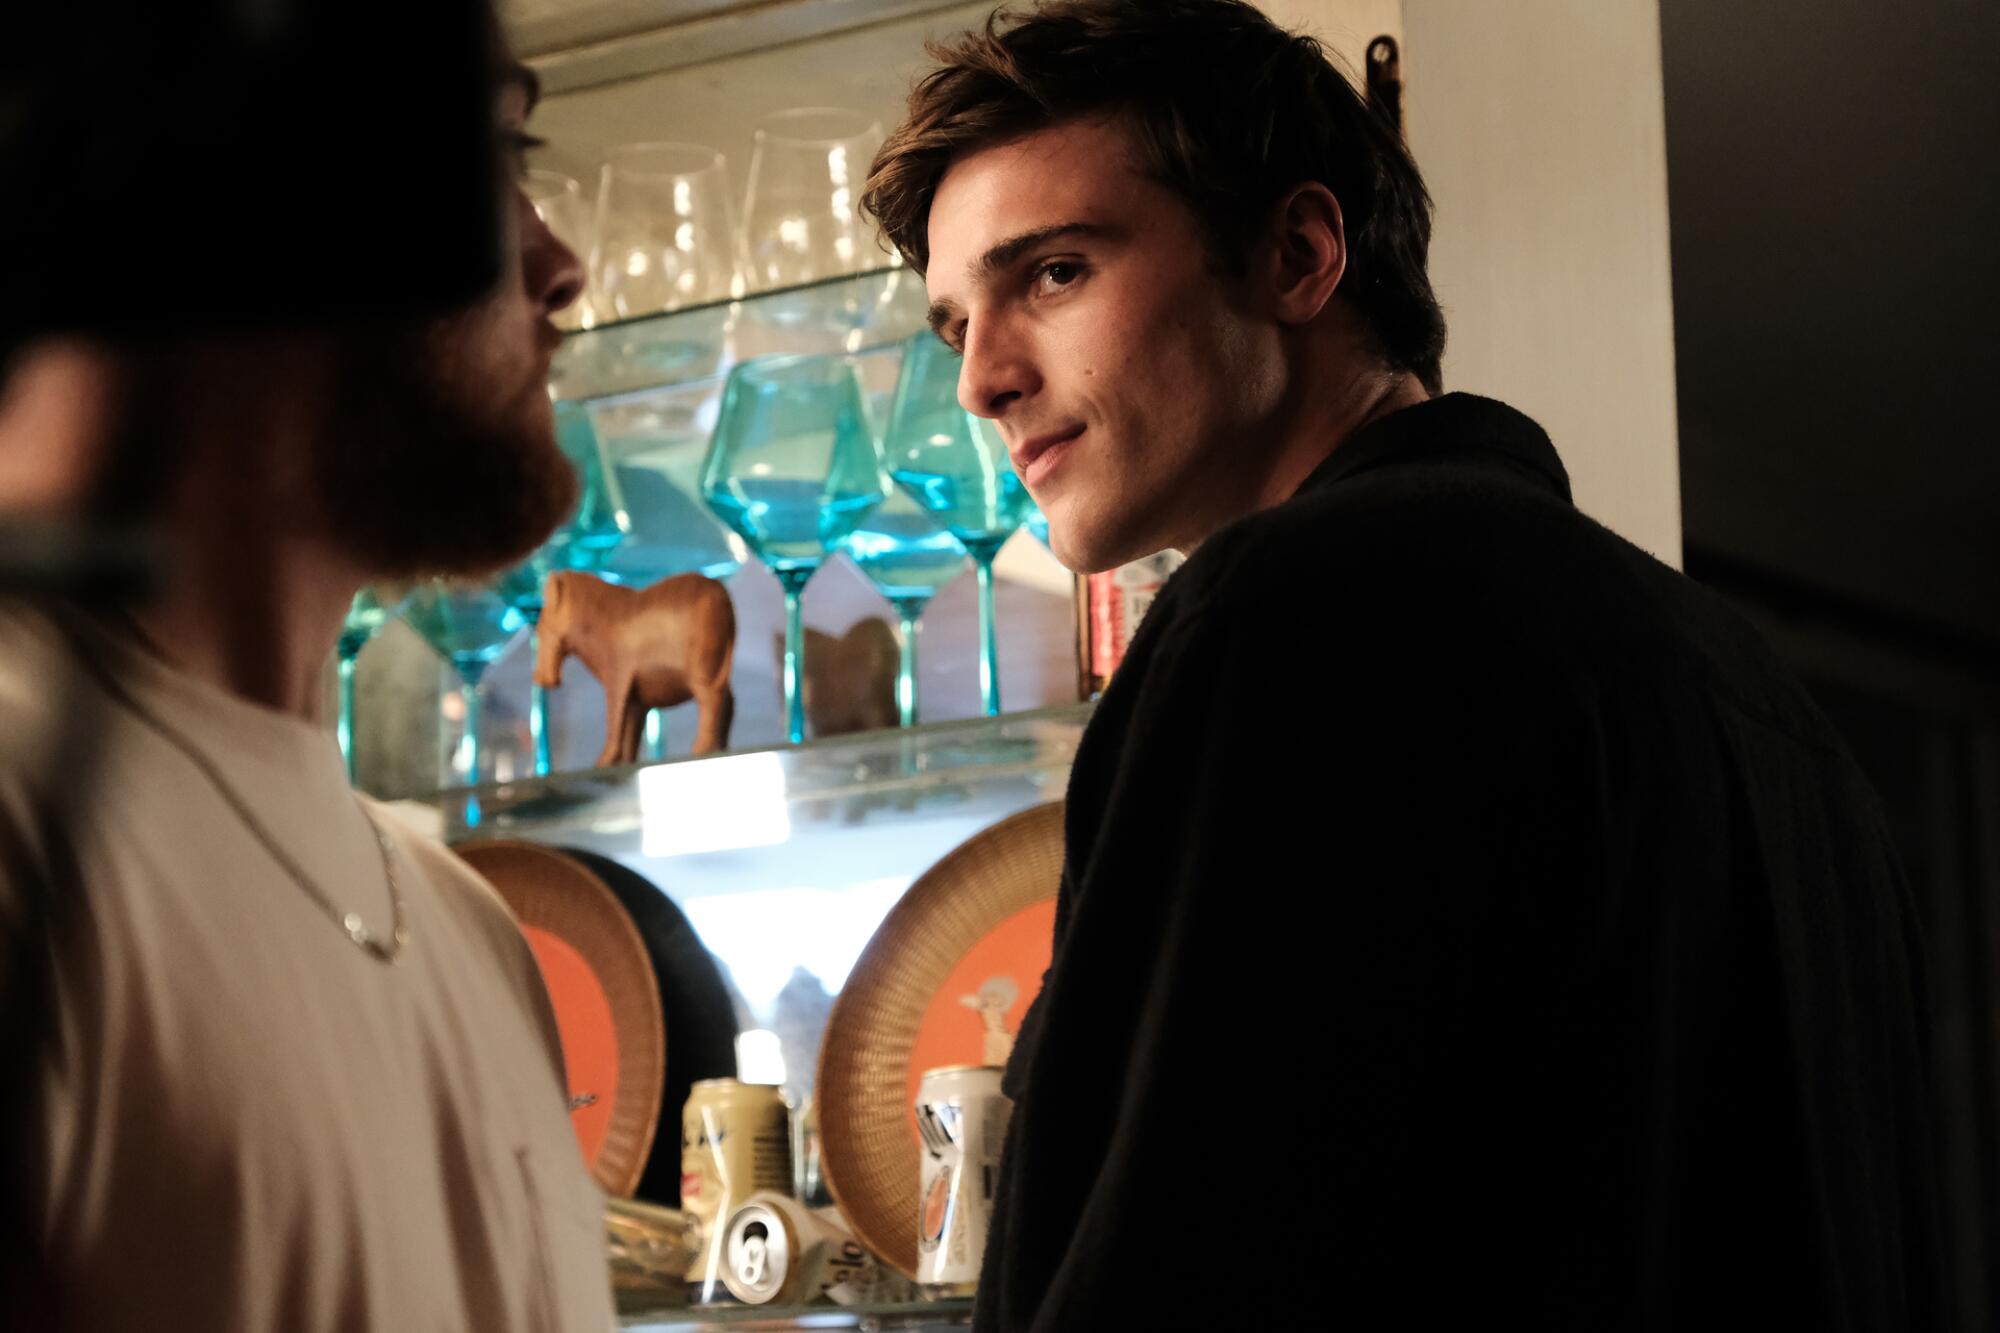 Two young men look at each other suspiciously in "Euphoria."